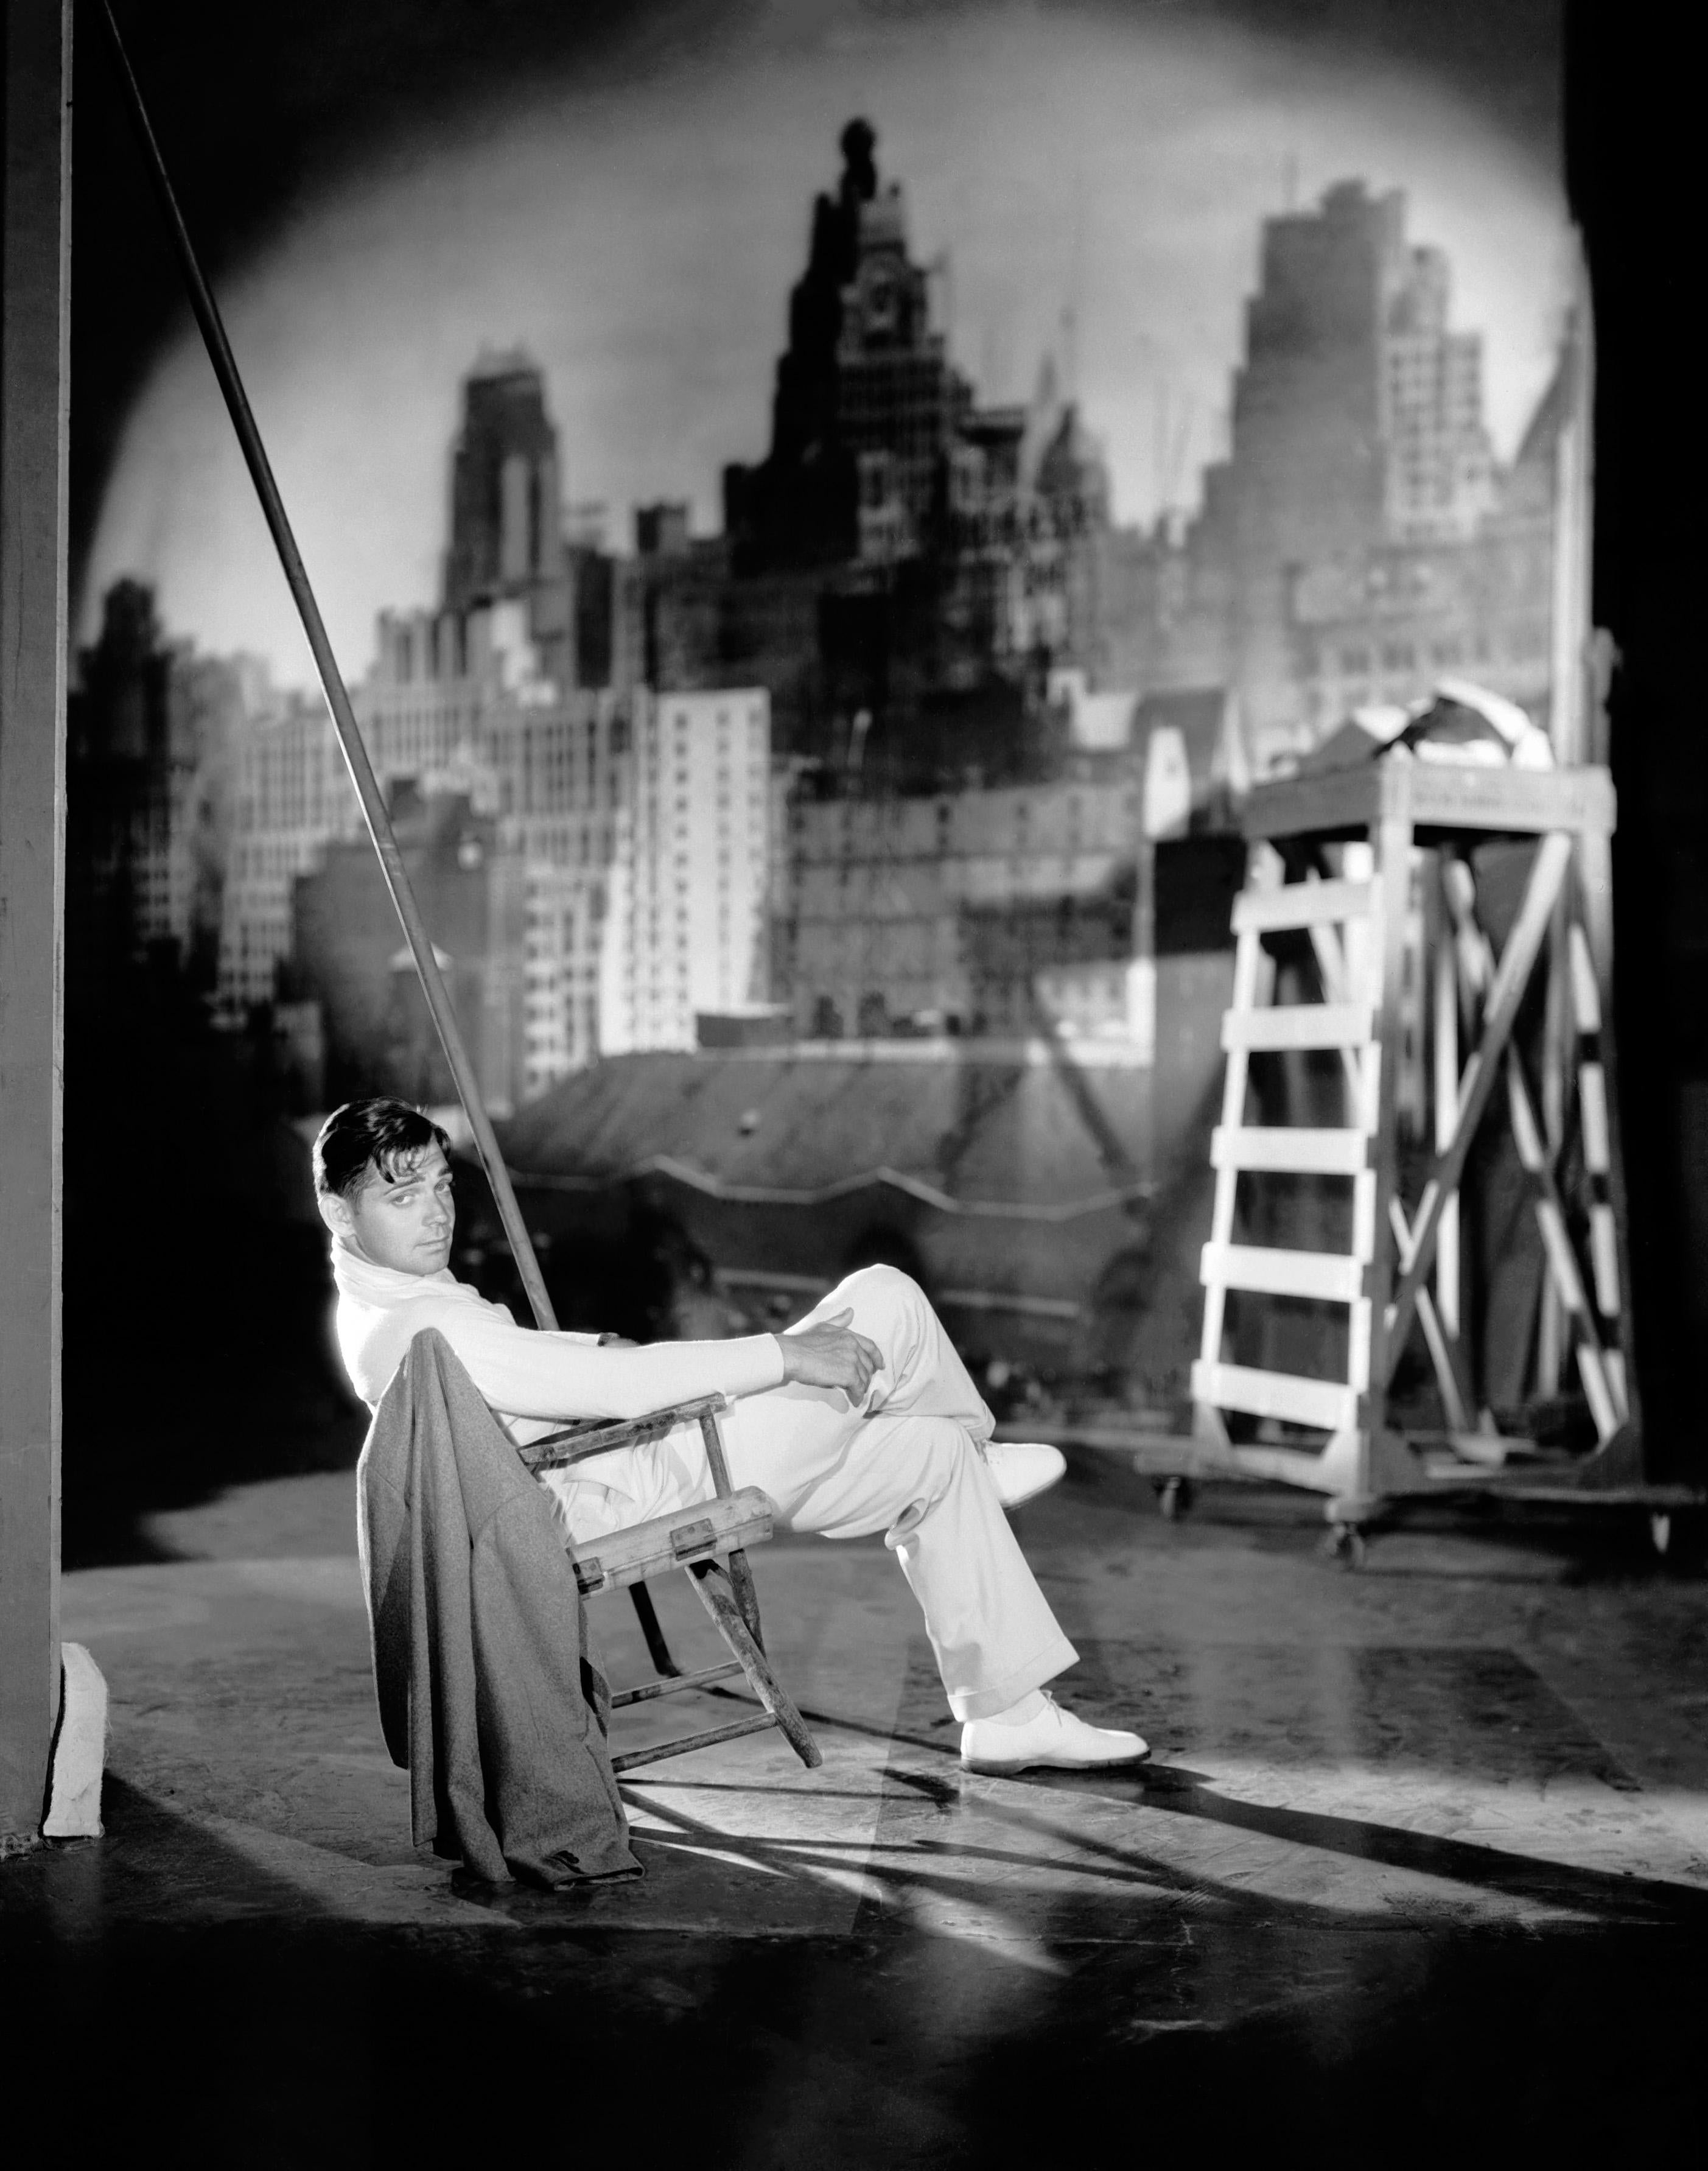 George Hurrell Black and White Photograph - Clark Gable Posed on Sound Stage II Globe Photos Fine Art Print